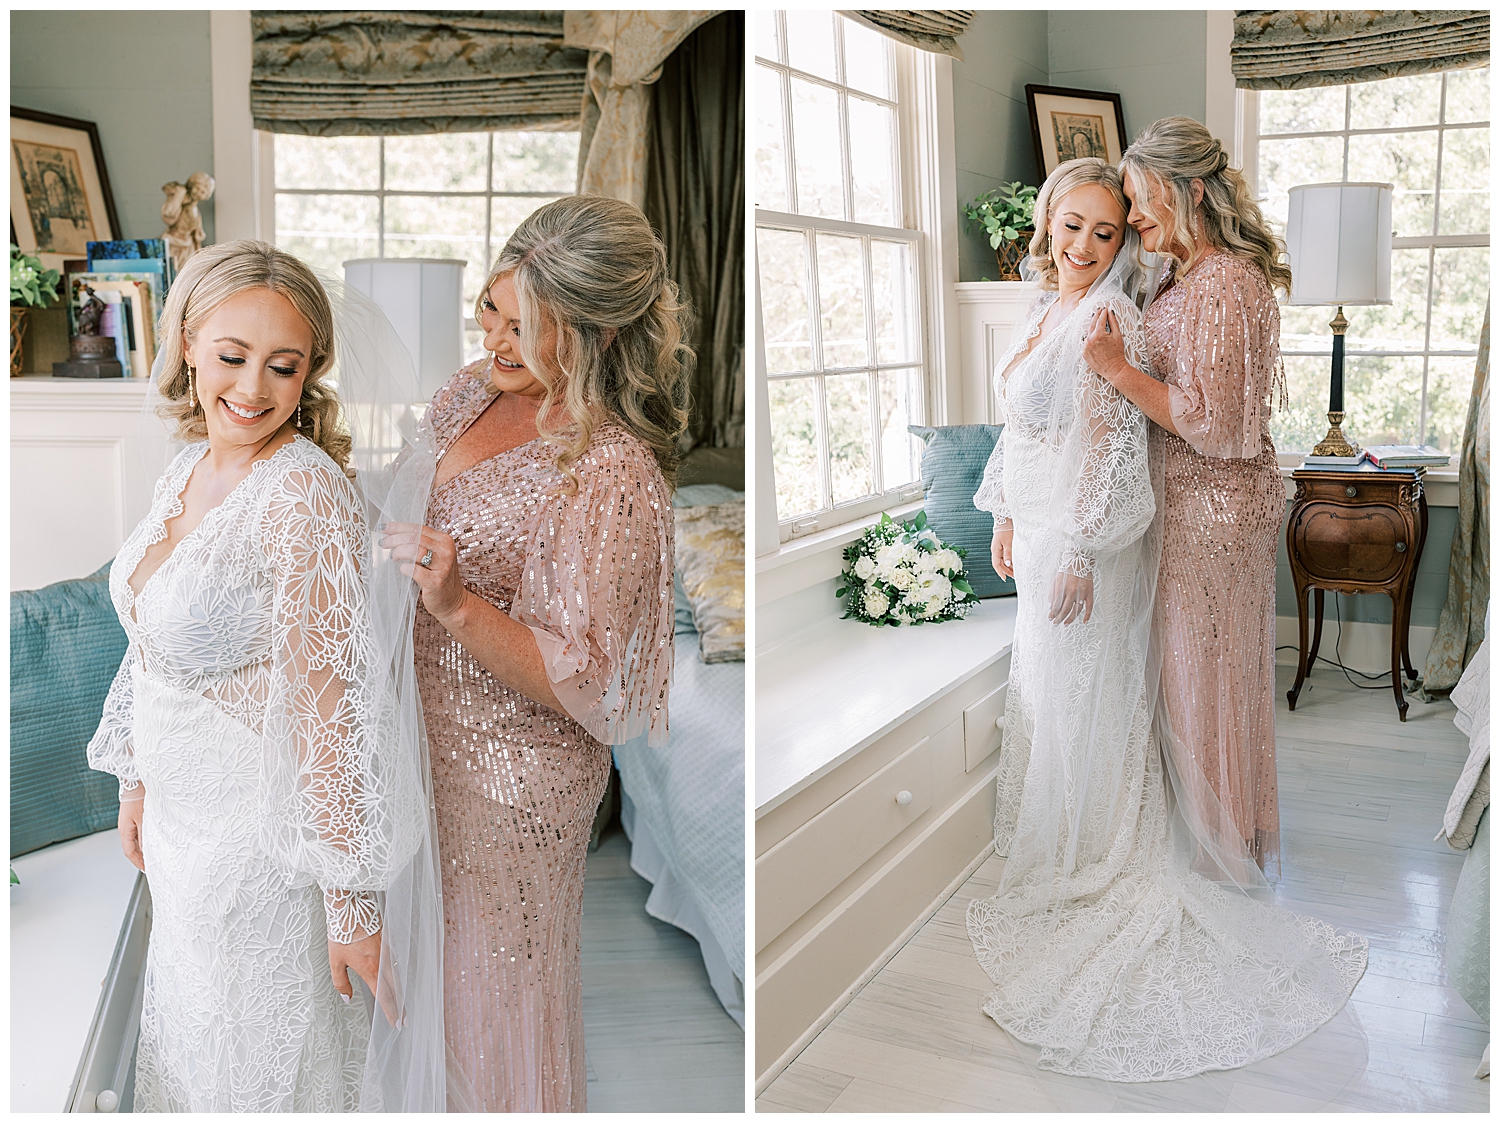 A bride and her mother share a sweet moment featured in Signature Magazine.